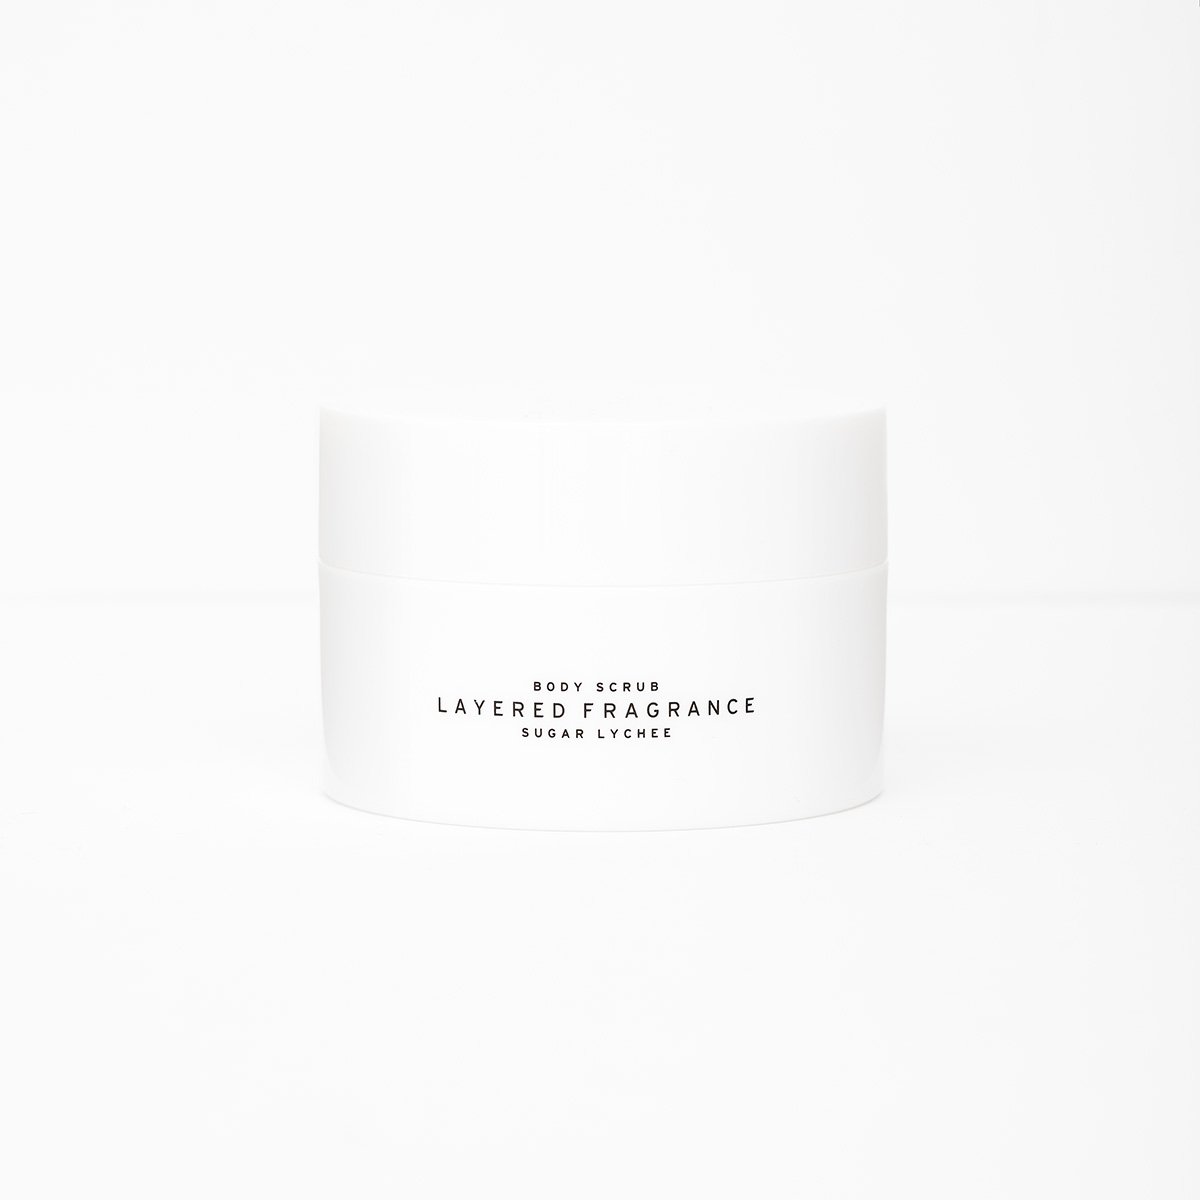 Layered Fragrance 香氛身体磨砂 甜荔枝 300g beauty Layered Fragrance Default 